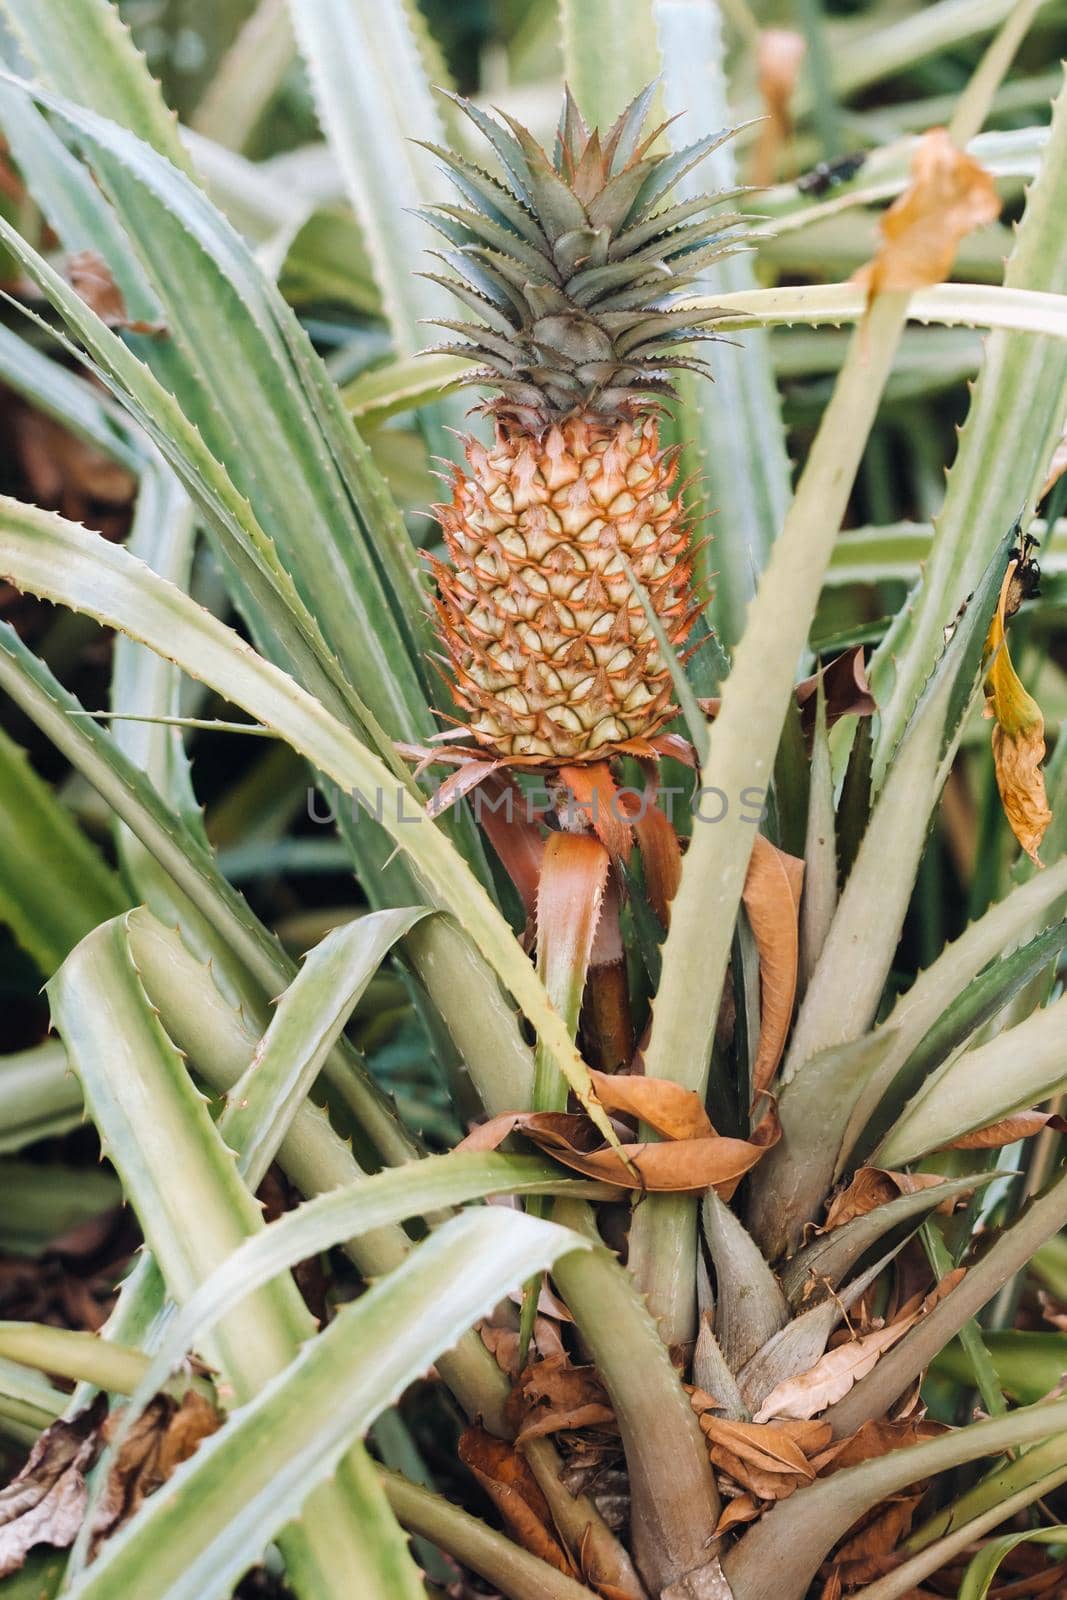 The pineapple on the clump has pink eyes. Pineapple trees grow tropical fruit in the pineapple plantation gardens. by Lobachad